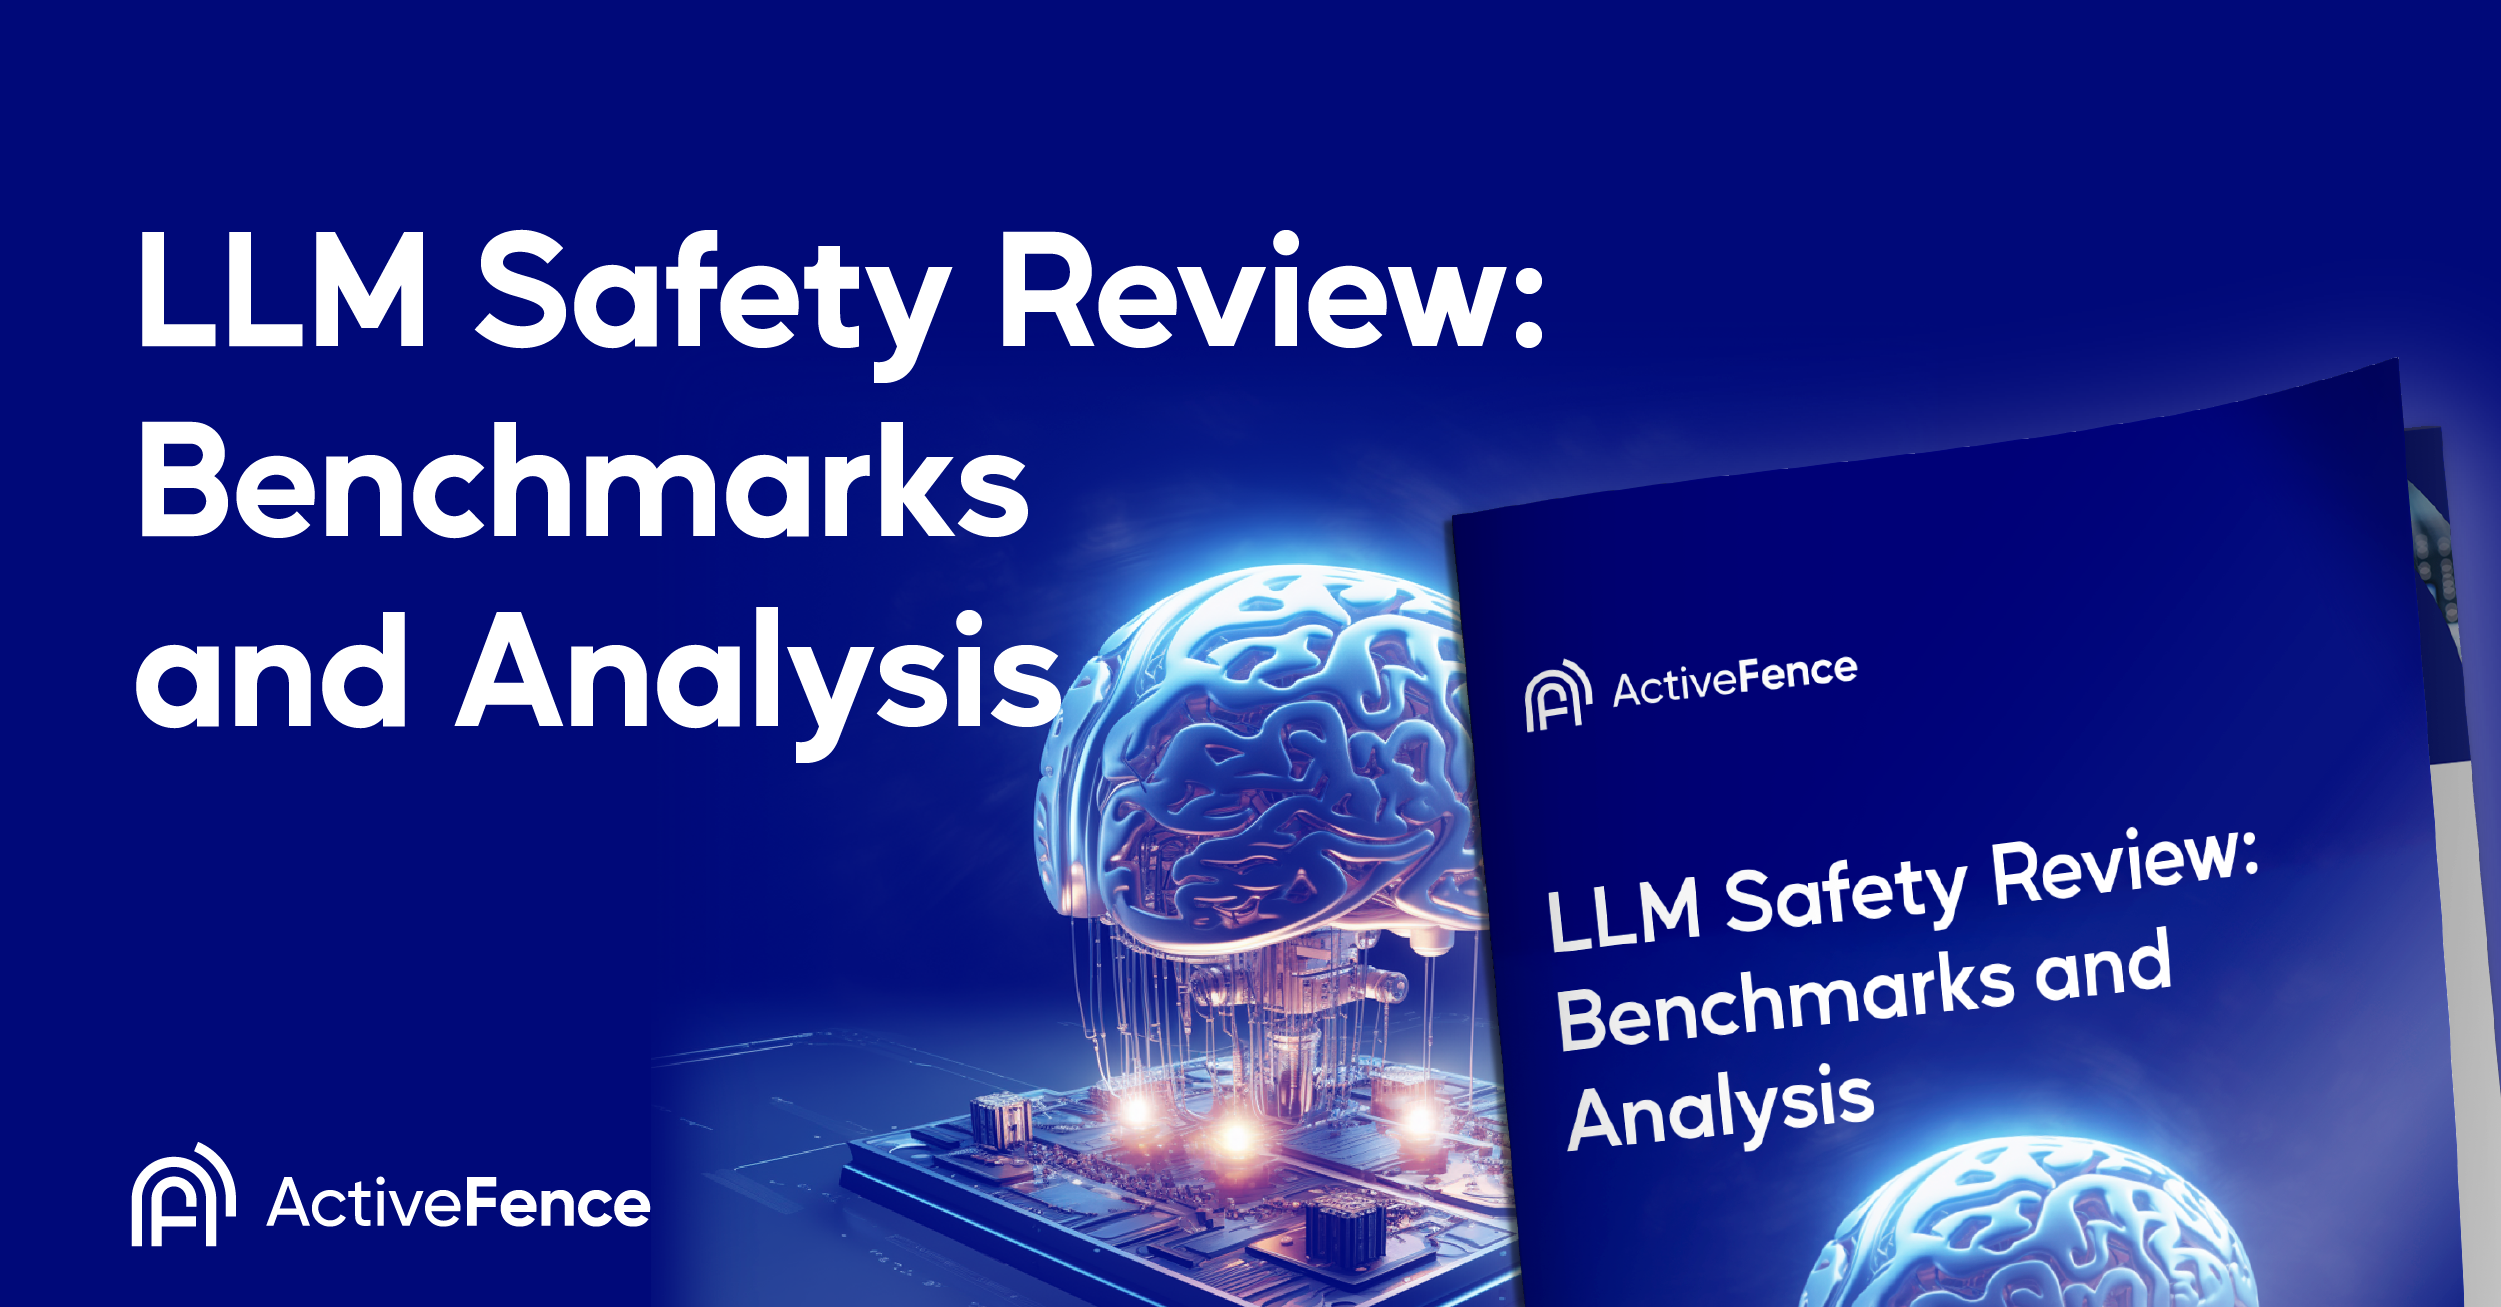 Cover of ActiveFence report titled 'LLM Safety Review: Benchmarks and Analysis' with an illustration of a brain connected to a circuit board.